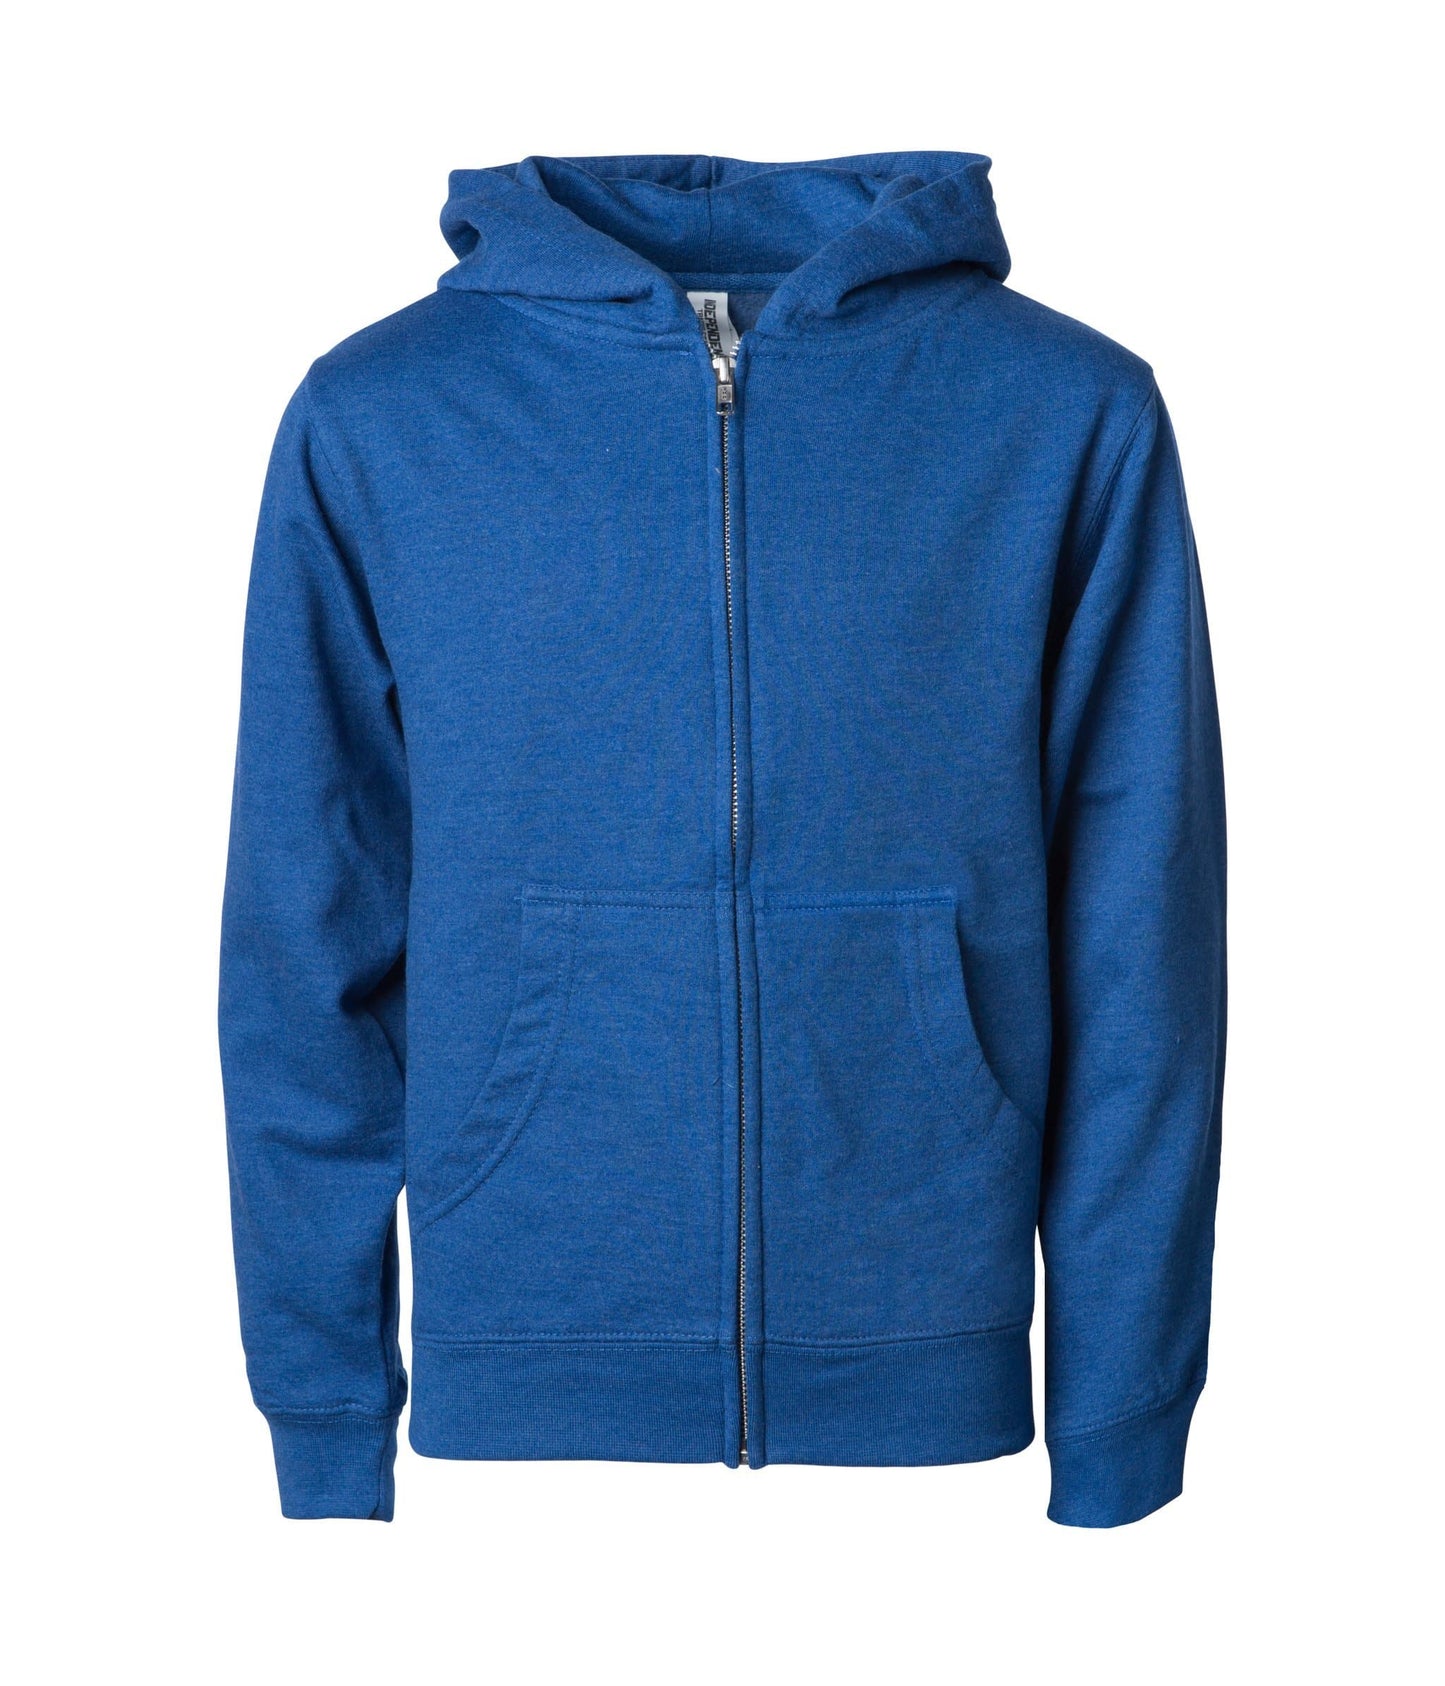 SS4001YZ Youth Midweight Zip Hooded Sweatshirt - Royal